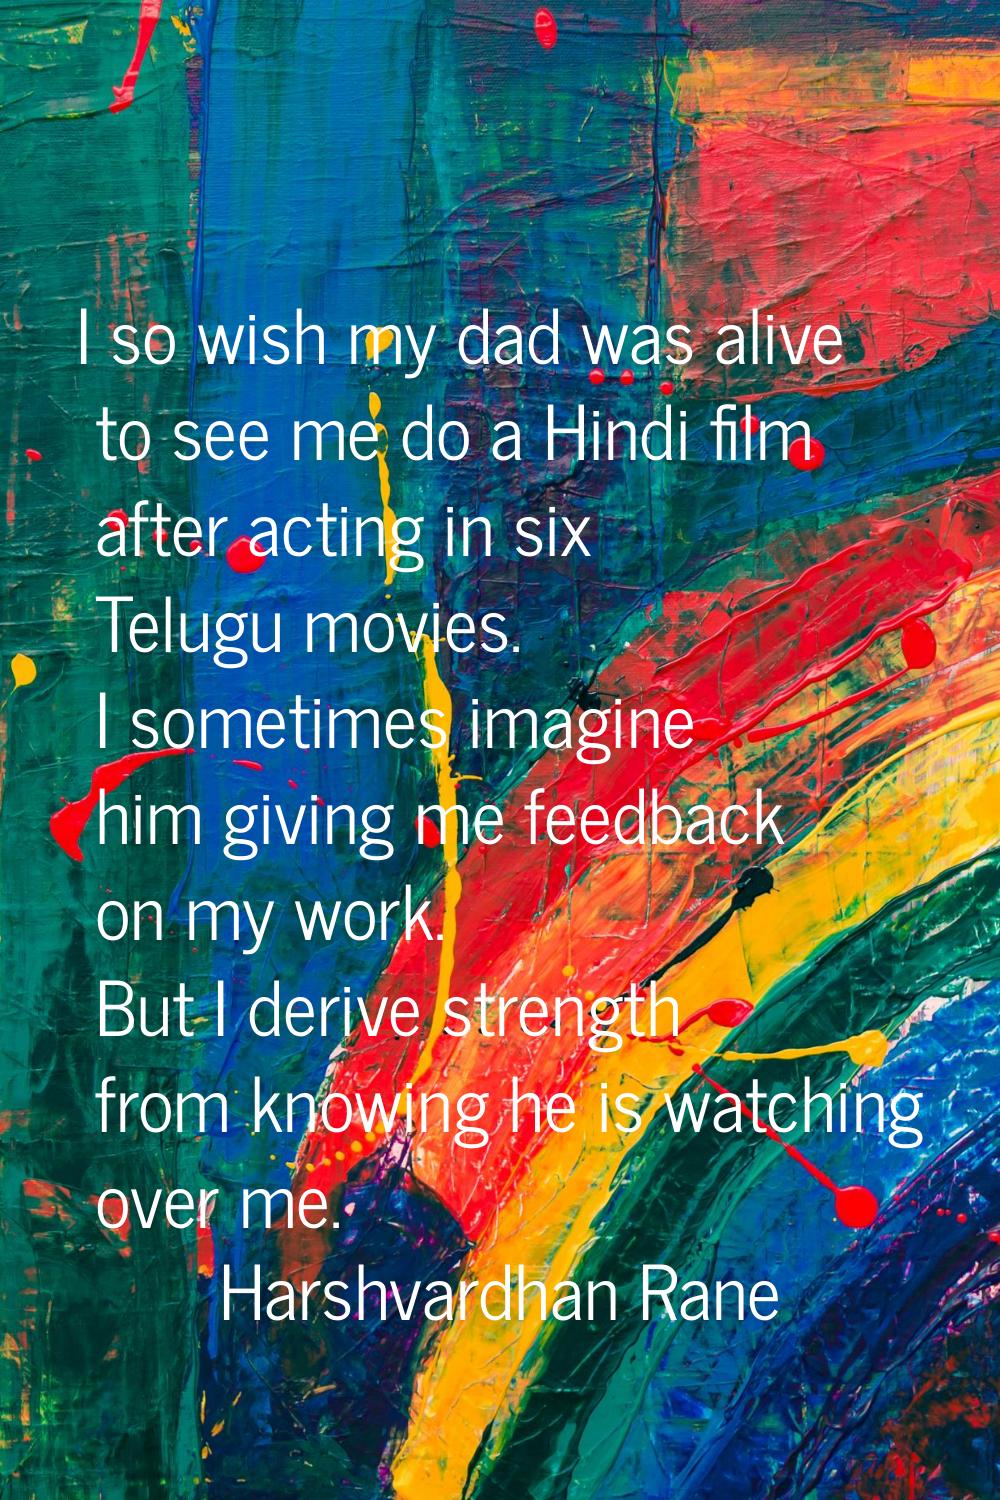 I so wish my dad was alive to see me do a Hindi film after acting in six Telugu movies. I sometimes